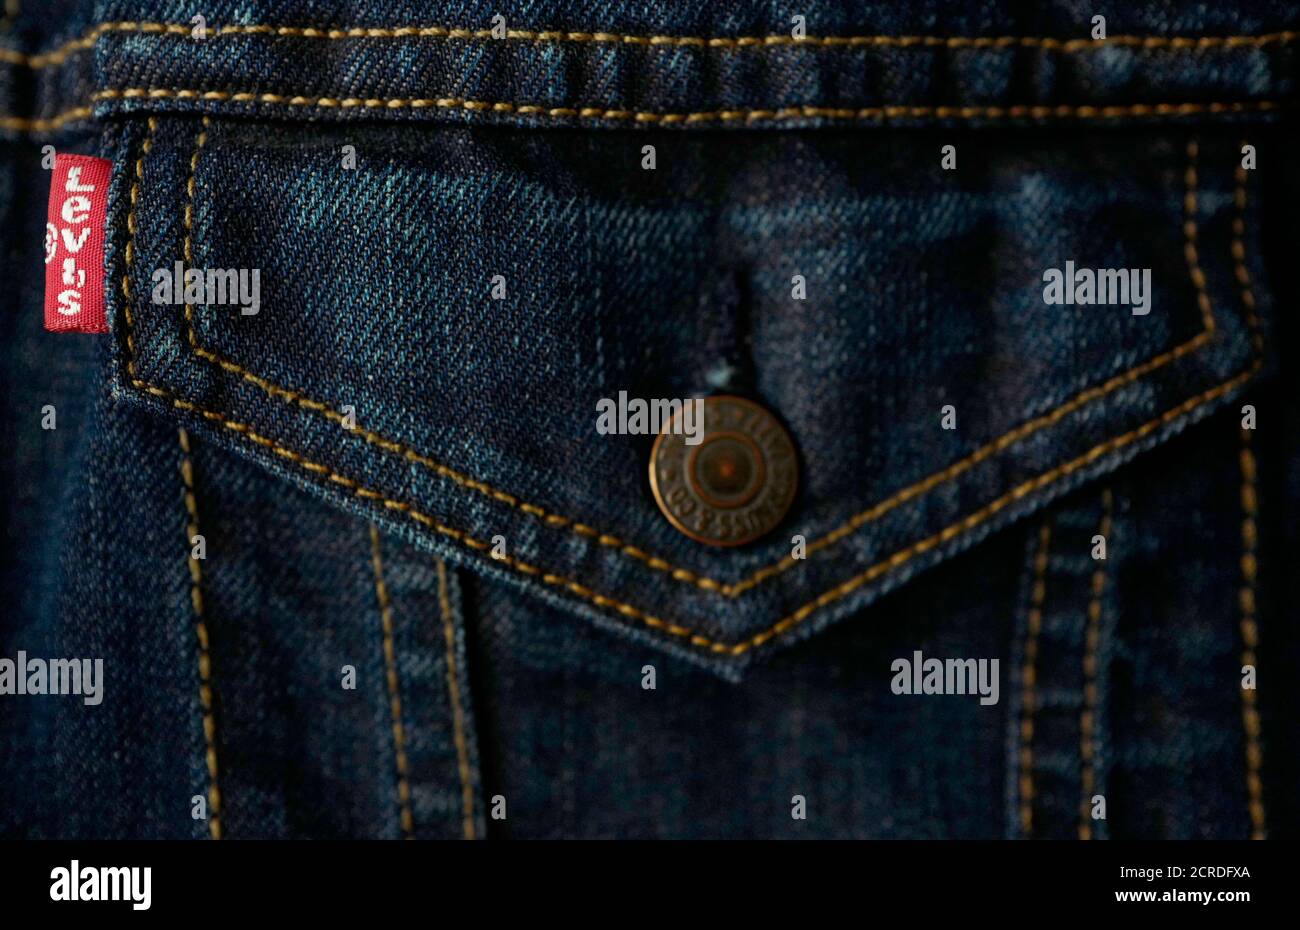 The label of a Levi's denim jacket of U.S. company Levi Strauss is  photographed at a denim store in Frankfurt, Germany, March 20, 2016.  REUTERS/Kai Pfaffenbach Stock Photo - Alamy